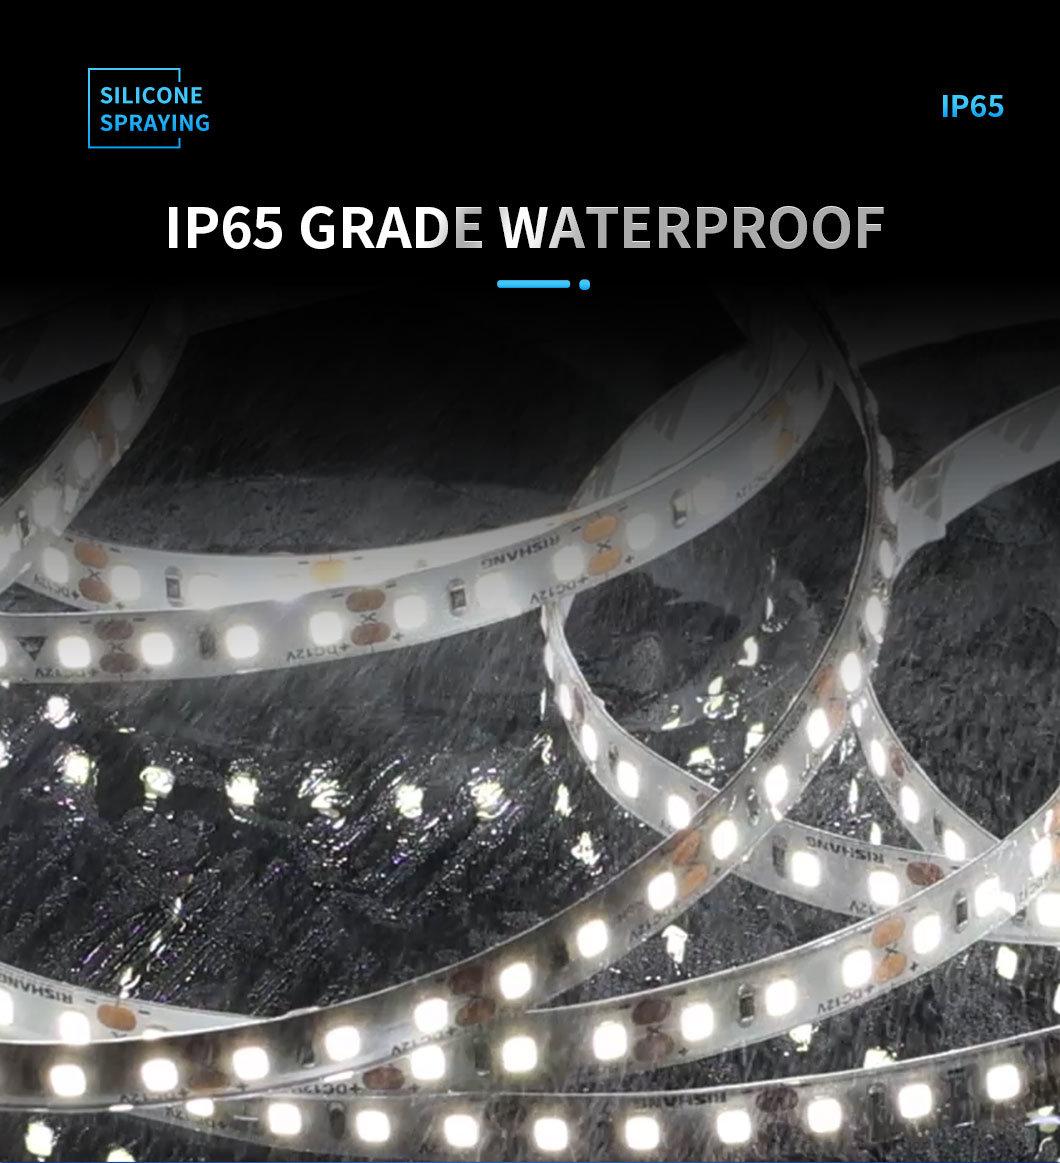 IP65 Waterproof Silicon Spraying Flexible LED Light Strip for Decorative Lighting